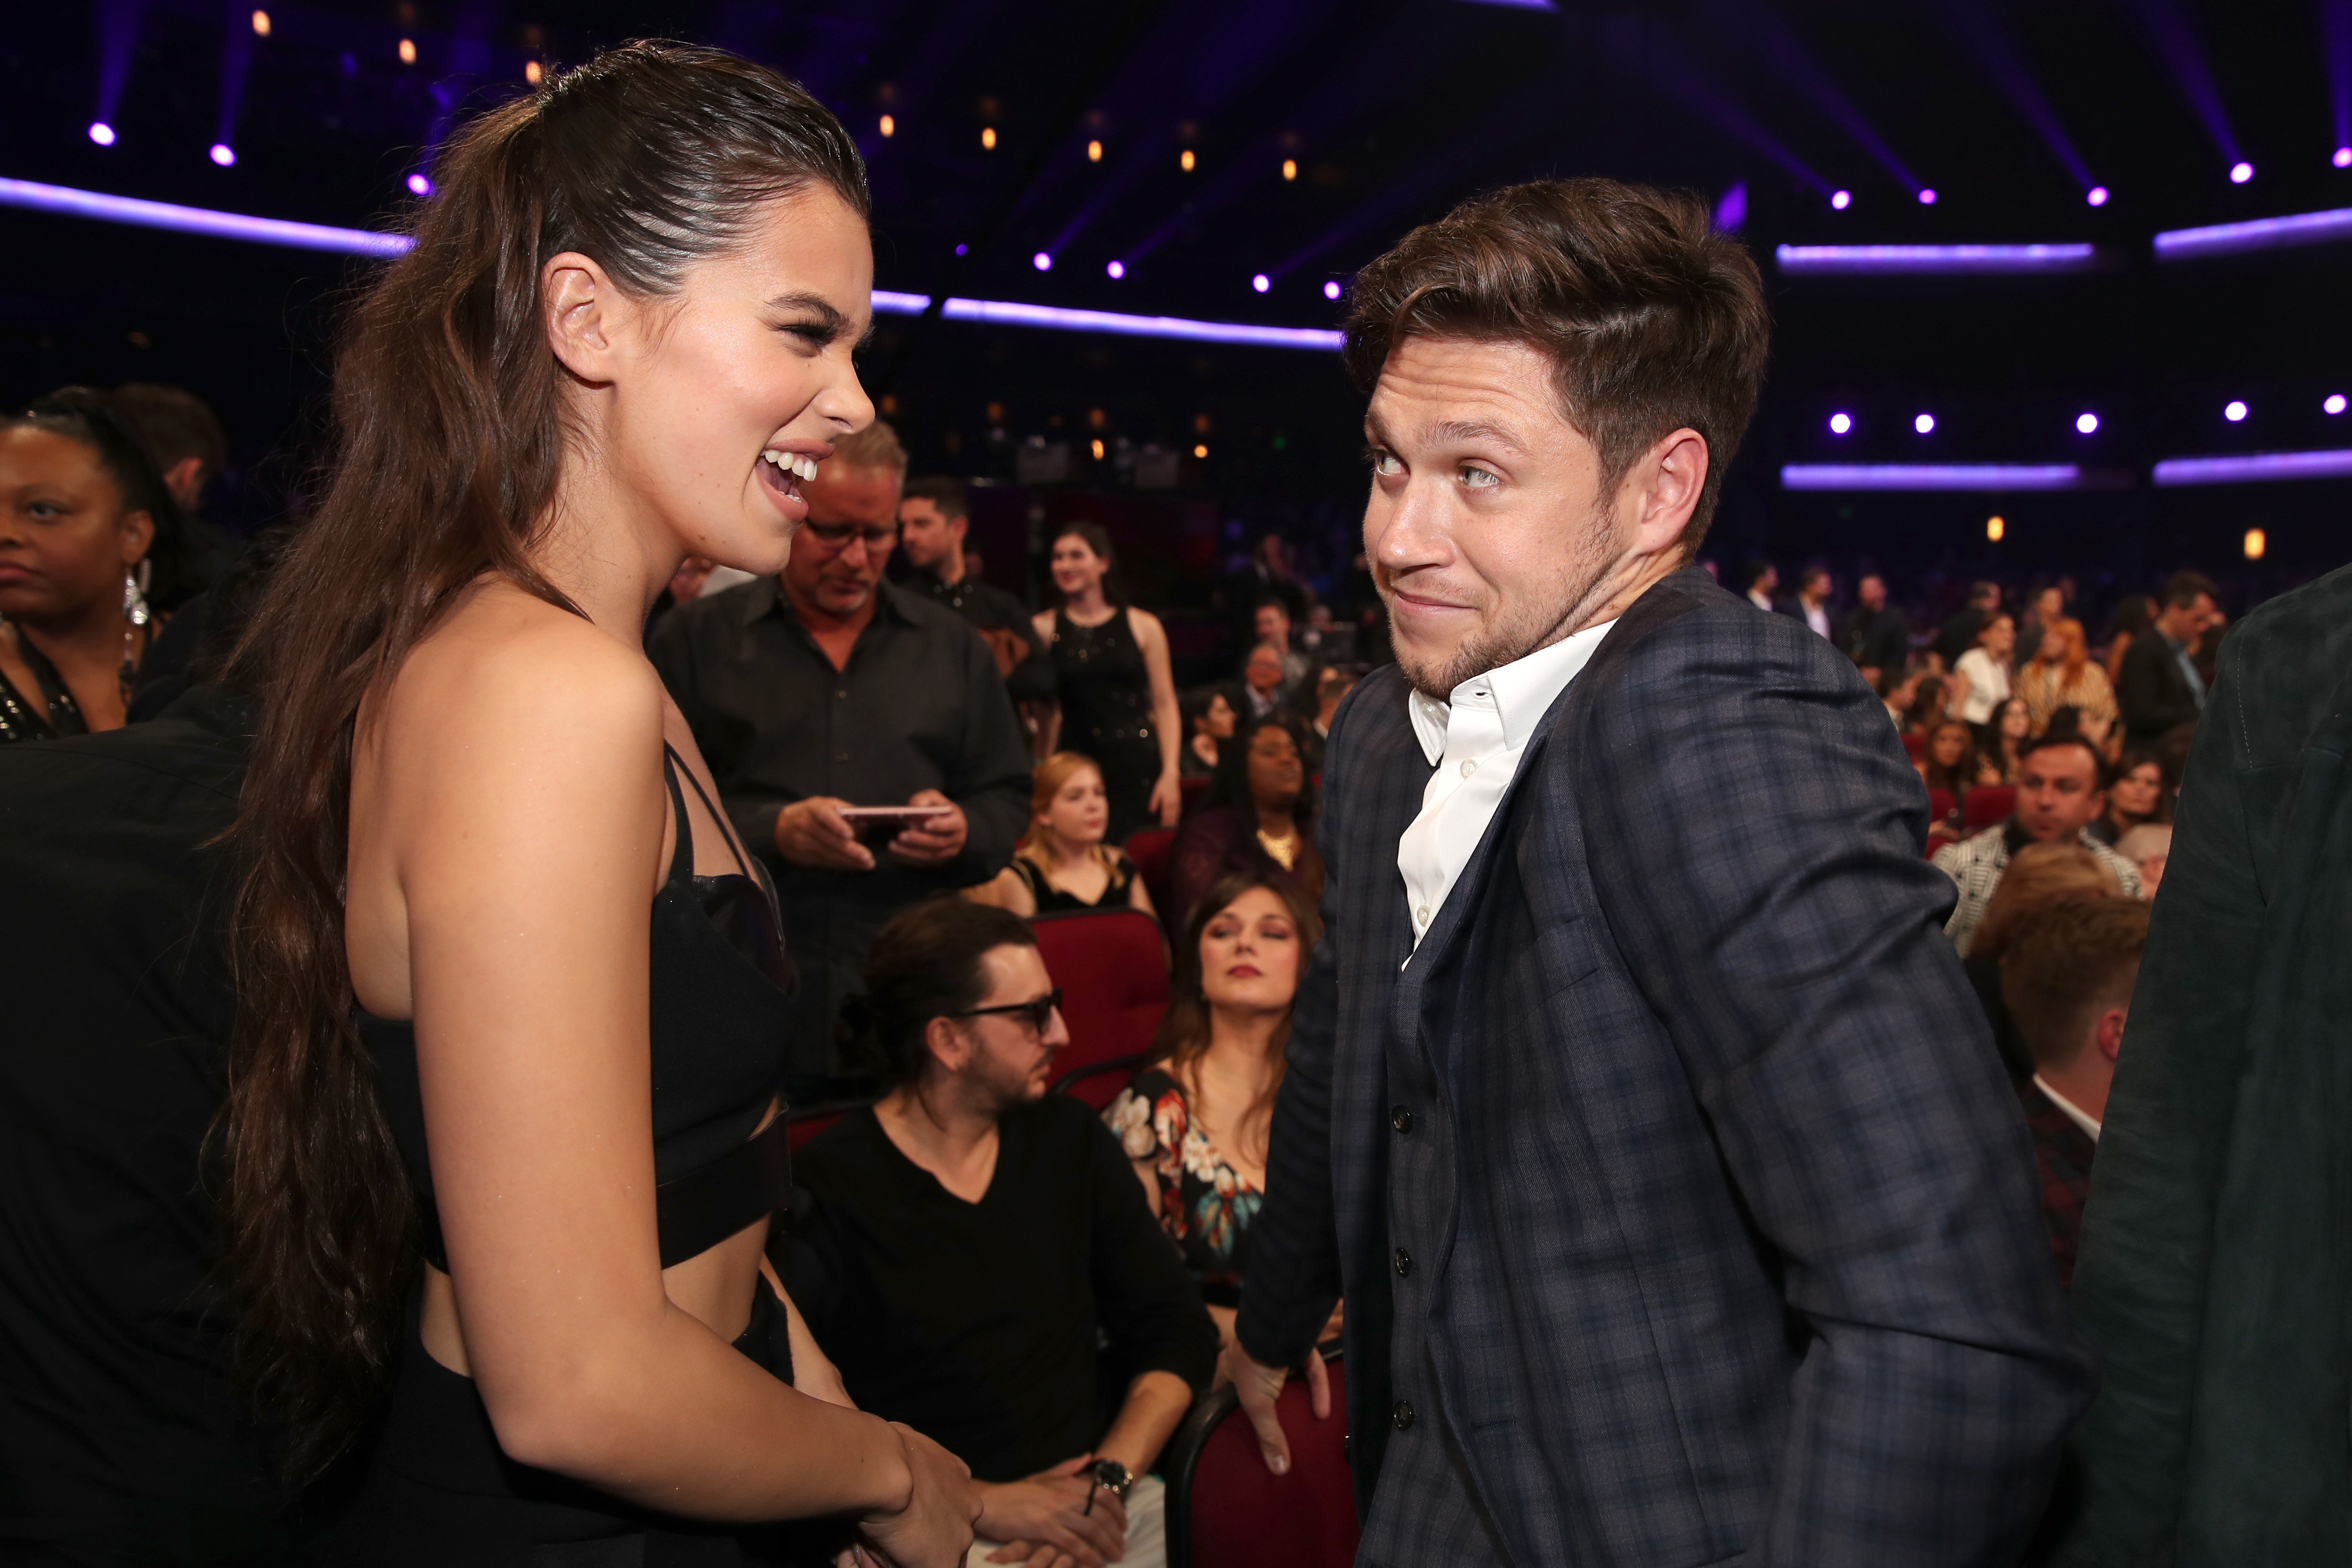 Hailee Steinfeld and Niall Horan during the 2017 American Music Awards at Microsoft Theater on November 19, 2017 in Los Angeles, California. | Source: Getty Images